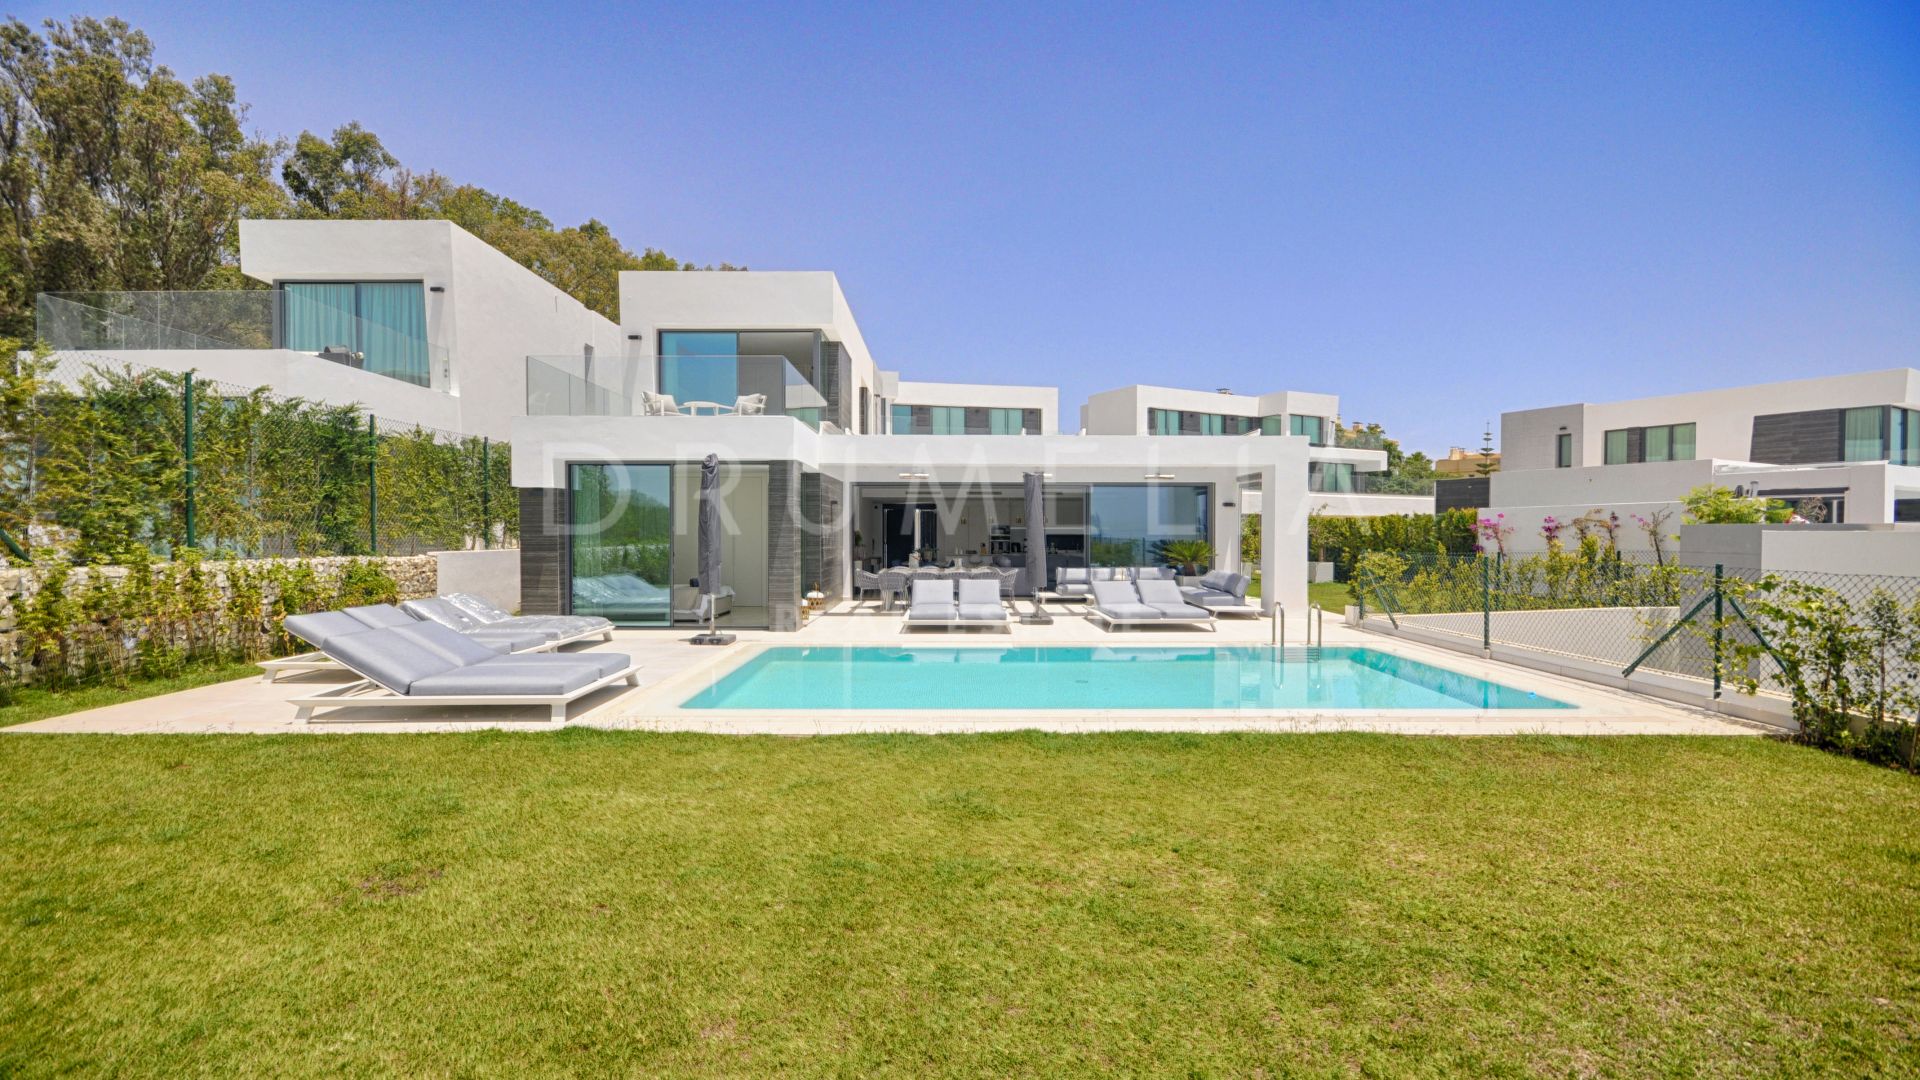 Immaculate, contemporary style villa with sea views in exclusive Cabo Royale, Marbella East / Calahonda